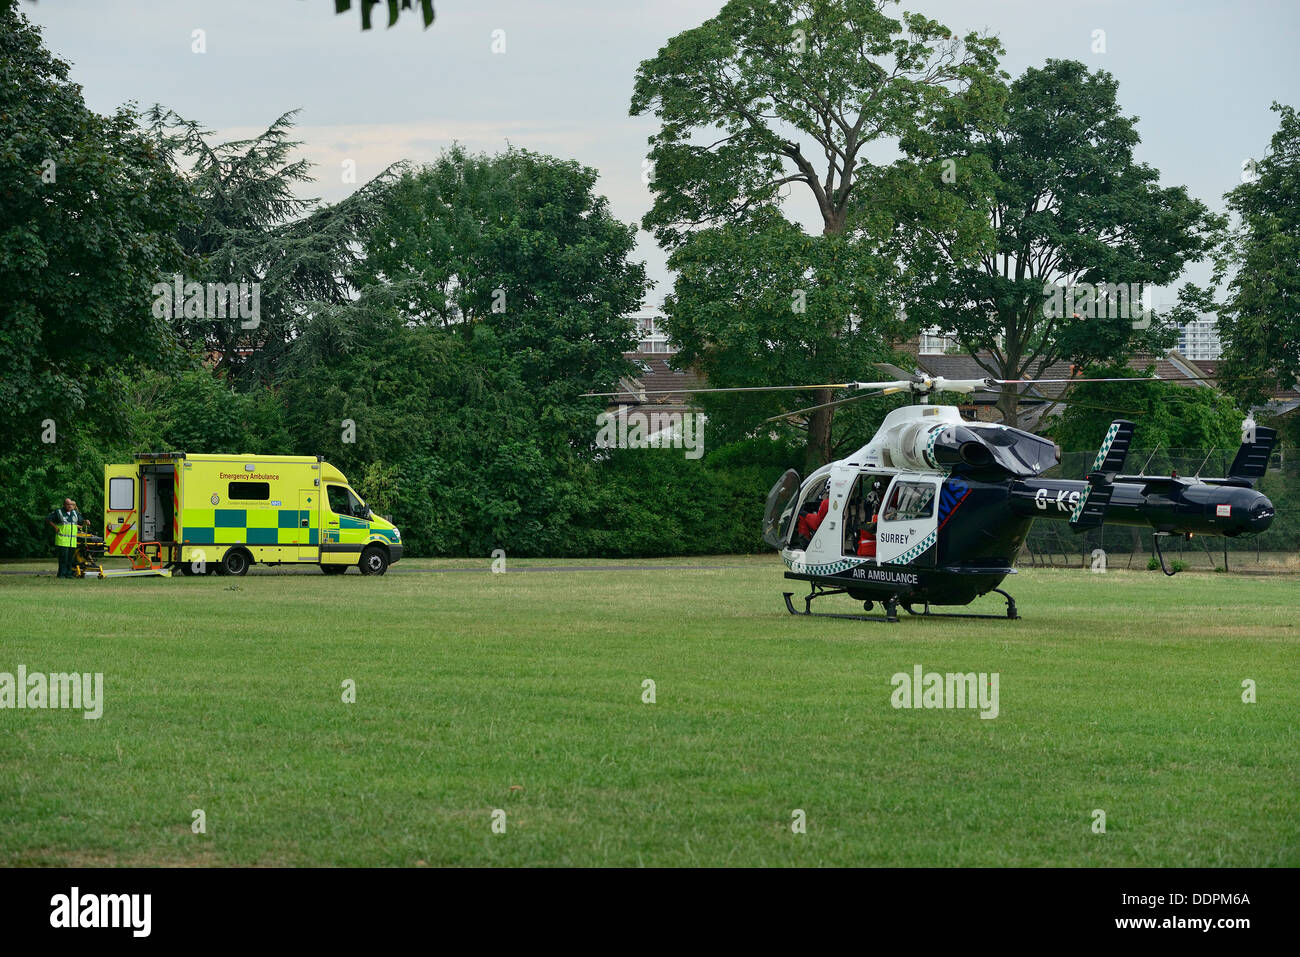 Medical Aviation Services Air Ambulance with a proper ambulance in the background, assisting with an injury in one of many London parks. Stock Photo